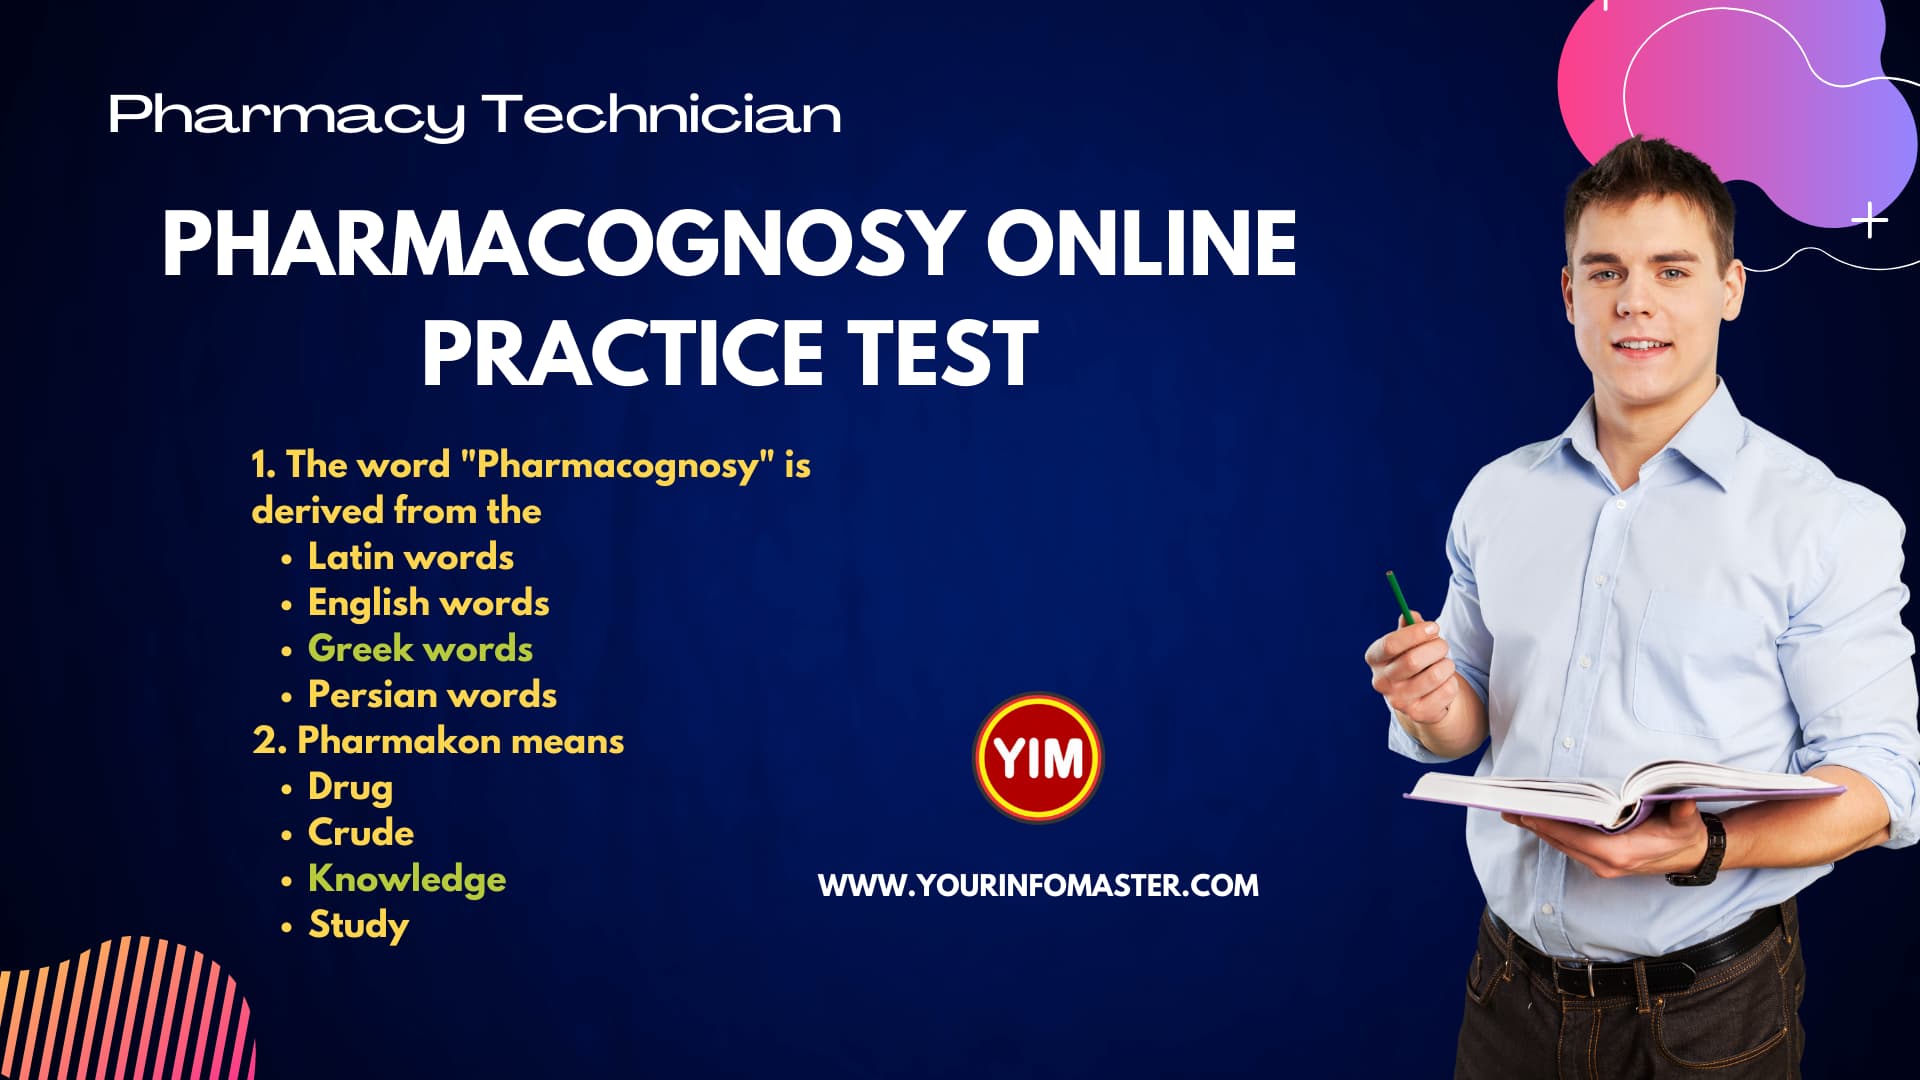 Important Questions, Learn Pharmacognosy Online, Online Practice Test, Pharmacognosy, Pharmacognosy Model Paper, Pharmacognosy Online Practice Test, Pharmacognosy Quiz, Pharmacy Assistant, Pharmacy Technician, Pharmacy Technician Past Papers, Pharmacy Technician Syllabus